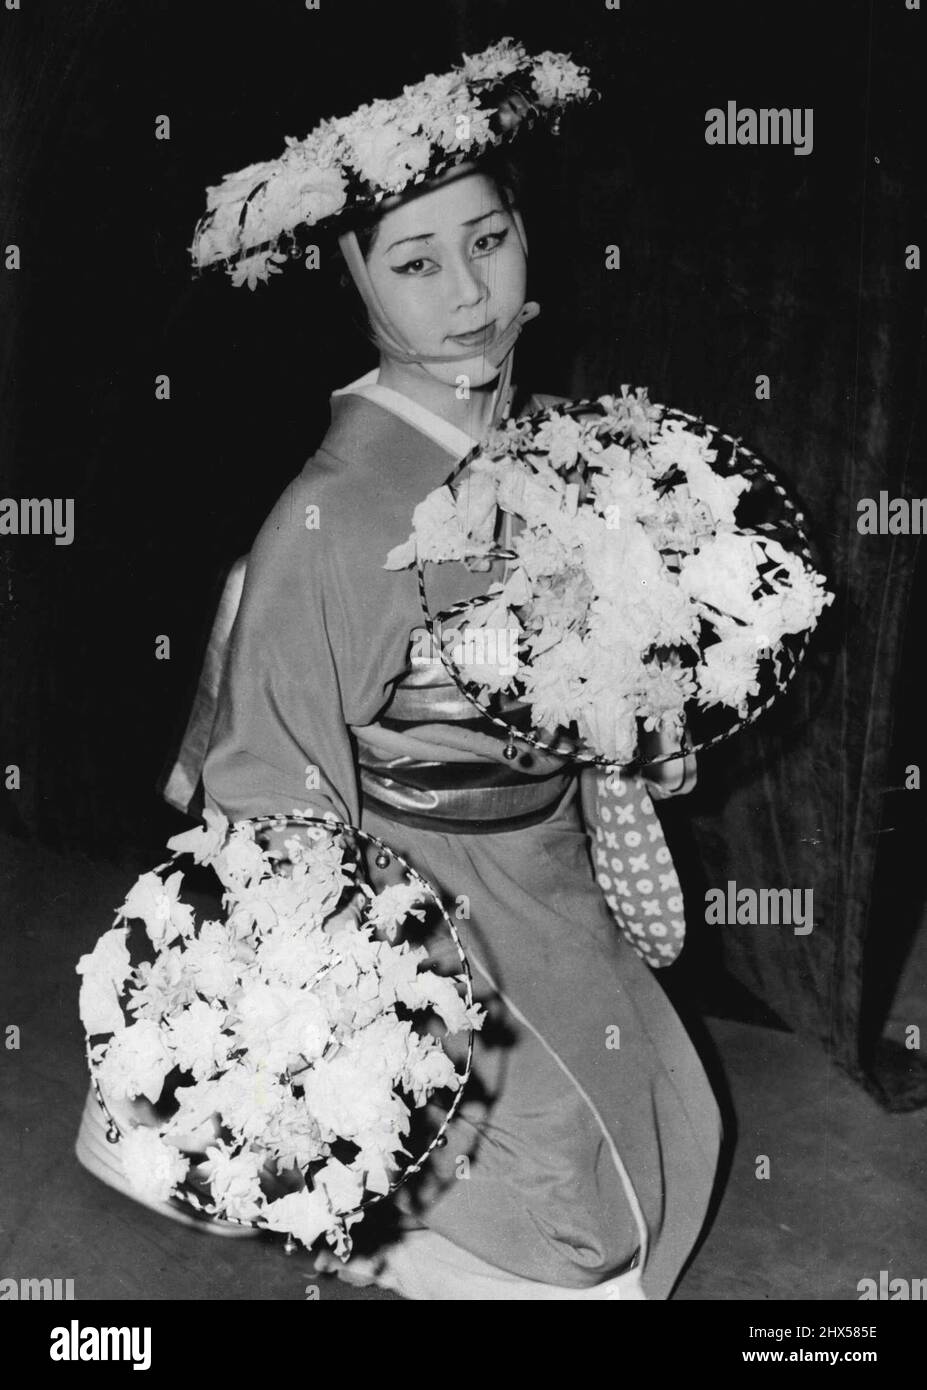 Japanese Ballet Rehearsal -- Members of the Japanese Ballet Company that are to appear at the Princes Theatre in London were to-day at rehearsals at that theatre. This photograph taken there ***** morning shows one of the ballerinas, Masako Okado makes a pretty picture during her rehearsal. November 03, 1954. (Photo by Daily Mail Contract Picture). Stock Photo